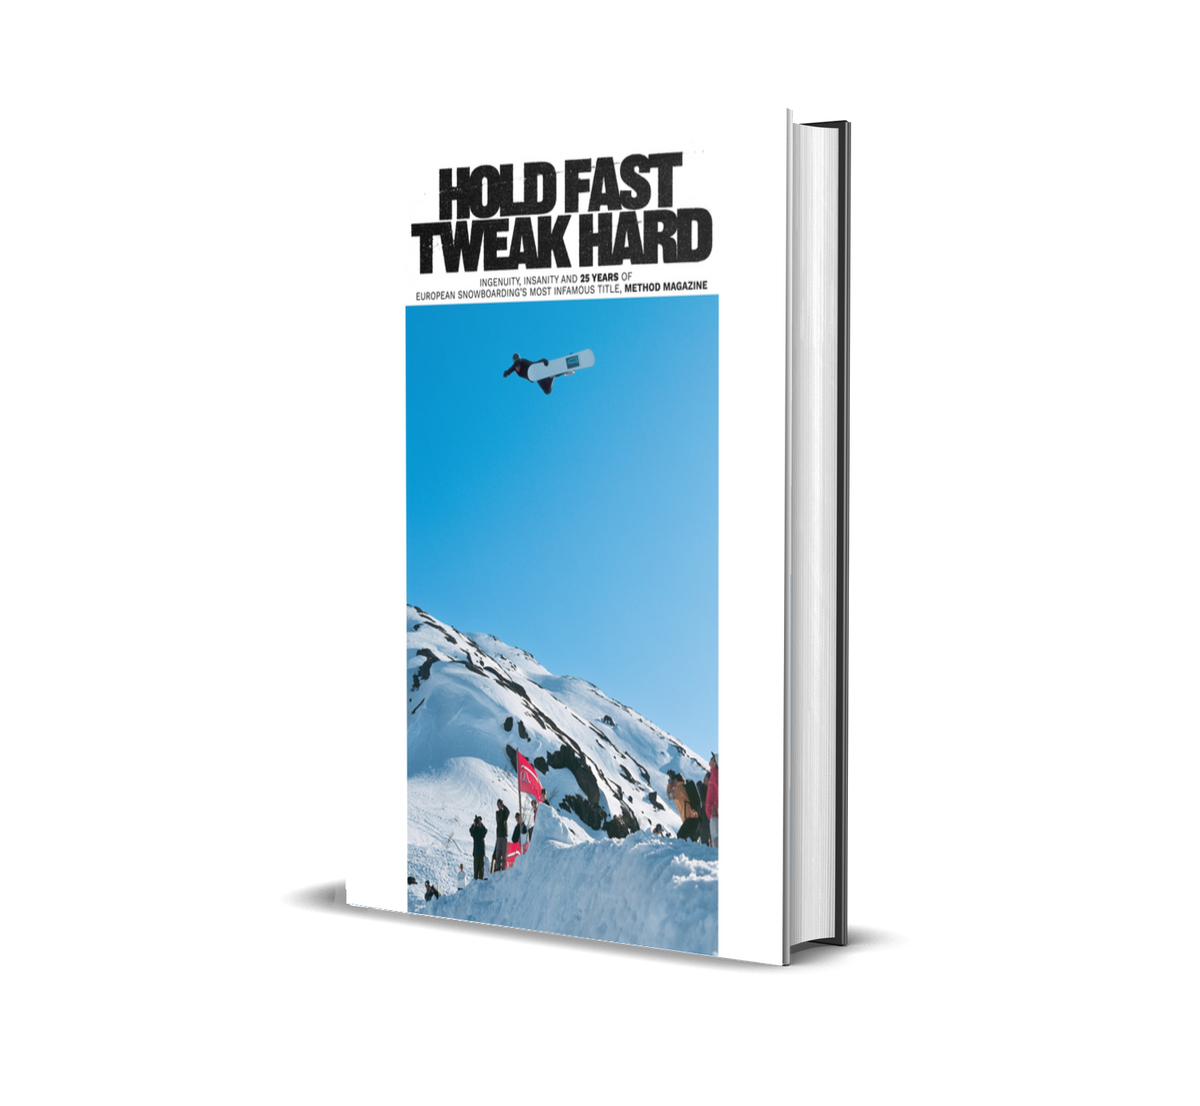 » Hold Fast, Tweak Hard: Ingenuity, Insanity and 25 Years of European Snowboarding&#39;s Most Infamous Title, Method Magazine (100% off)